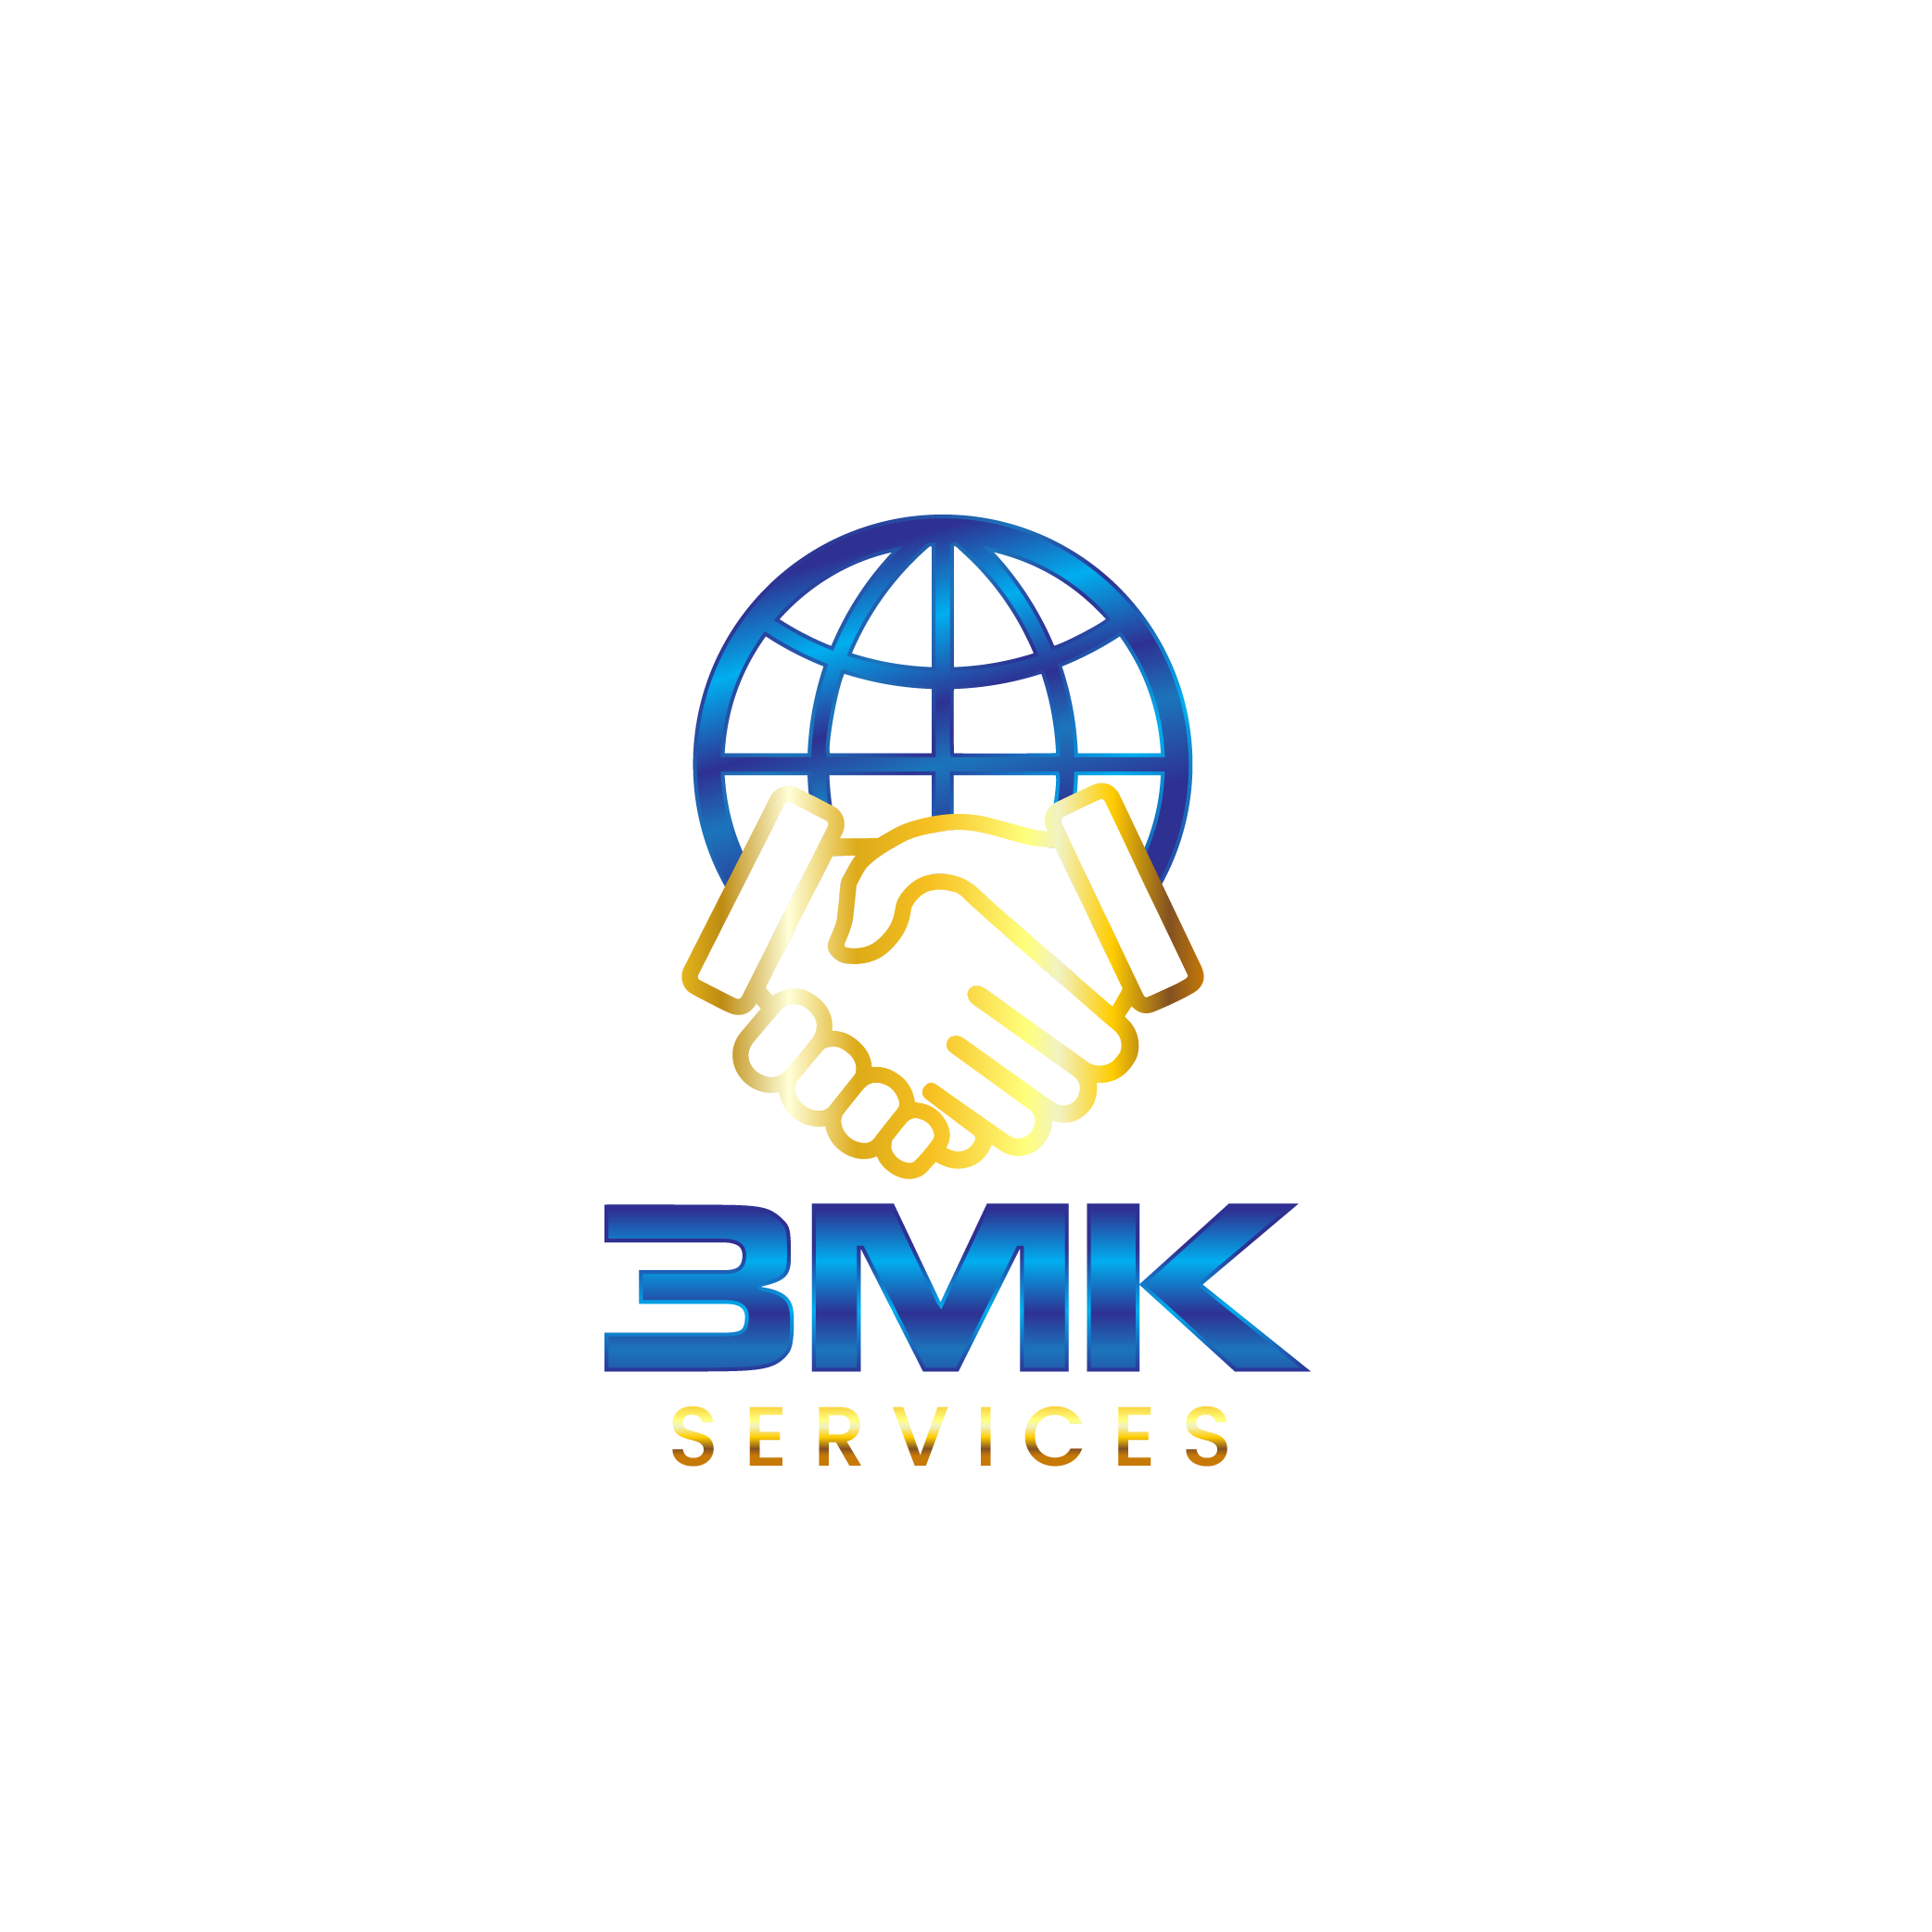 3MK Services Logo and Icon